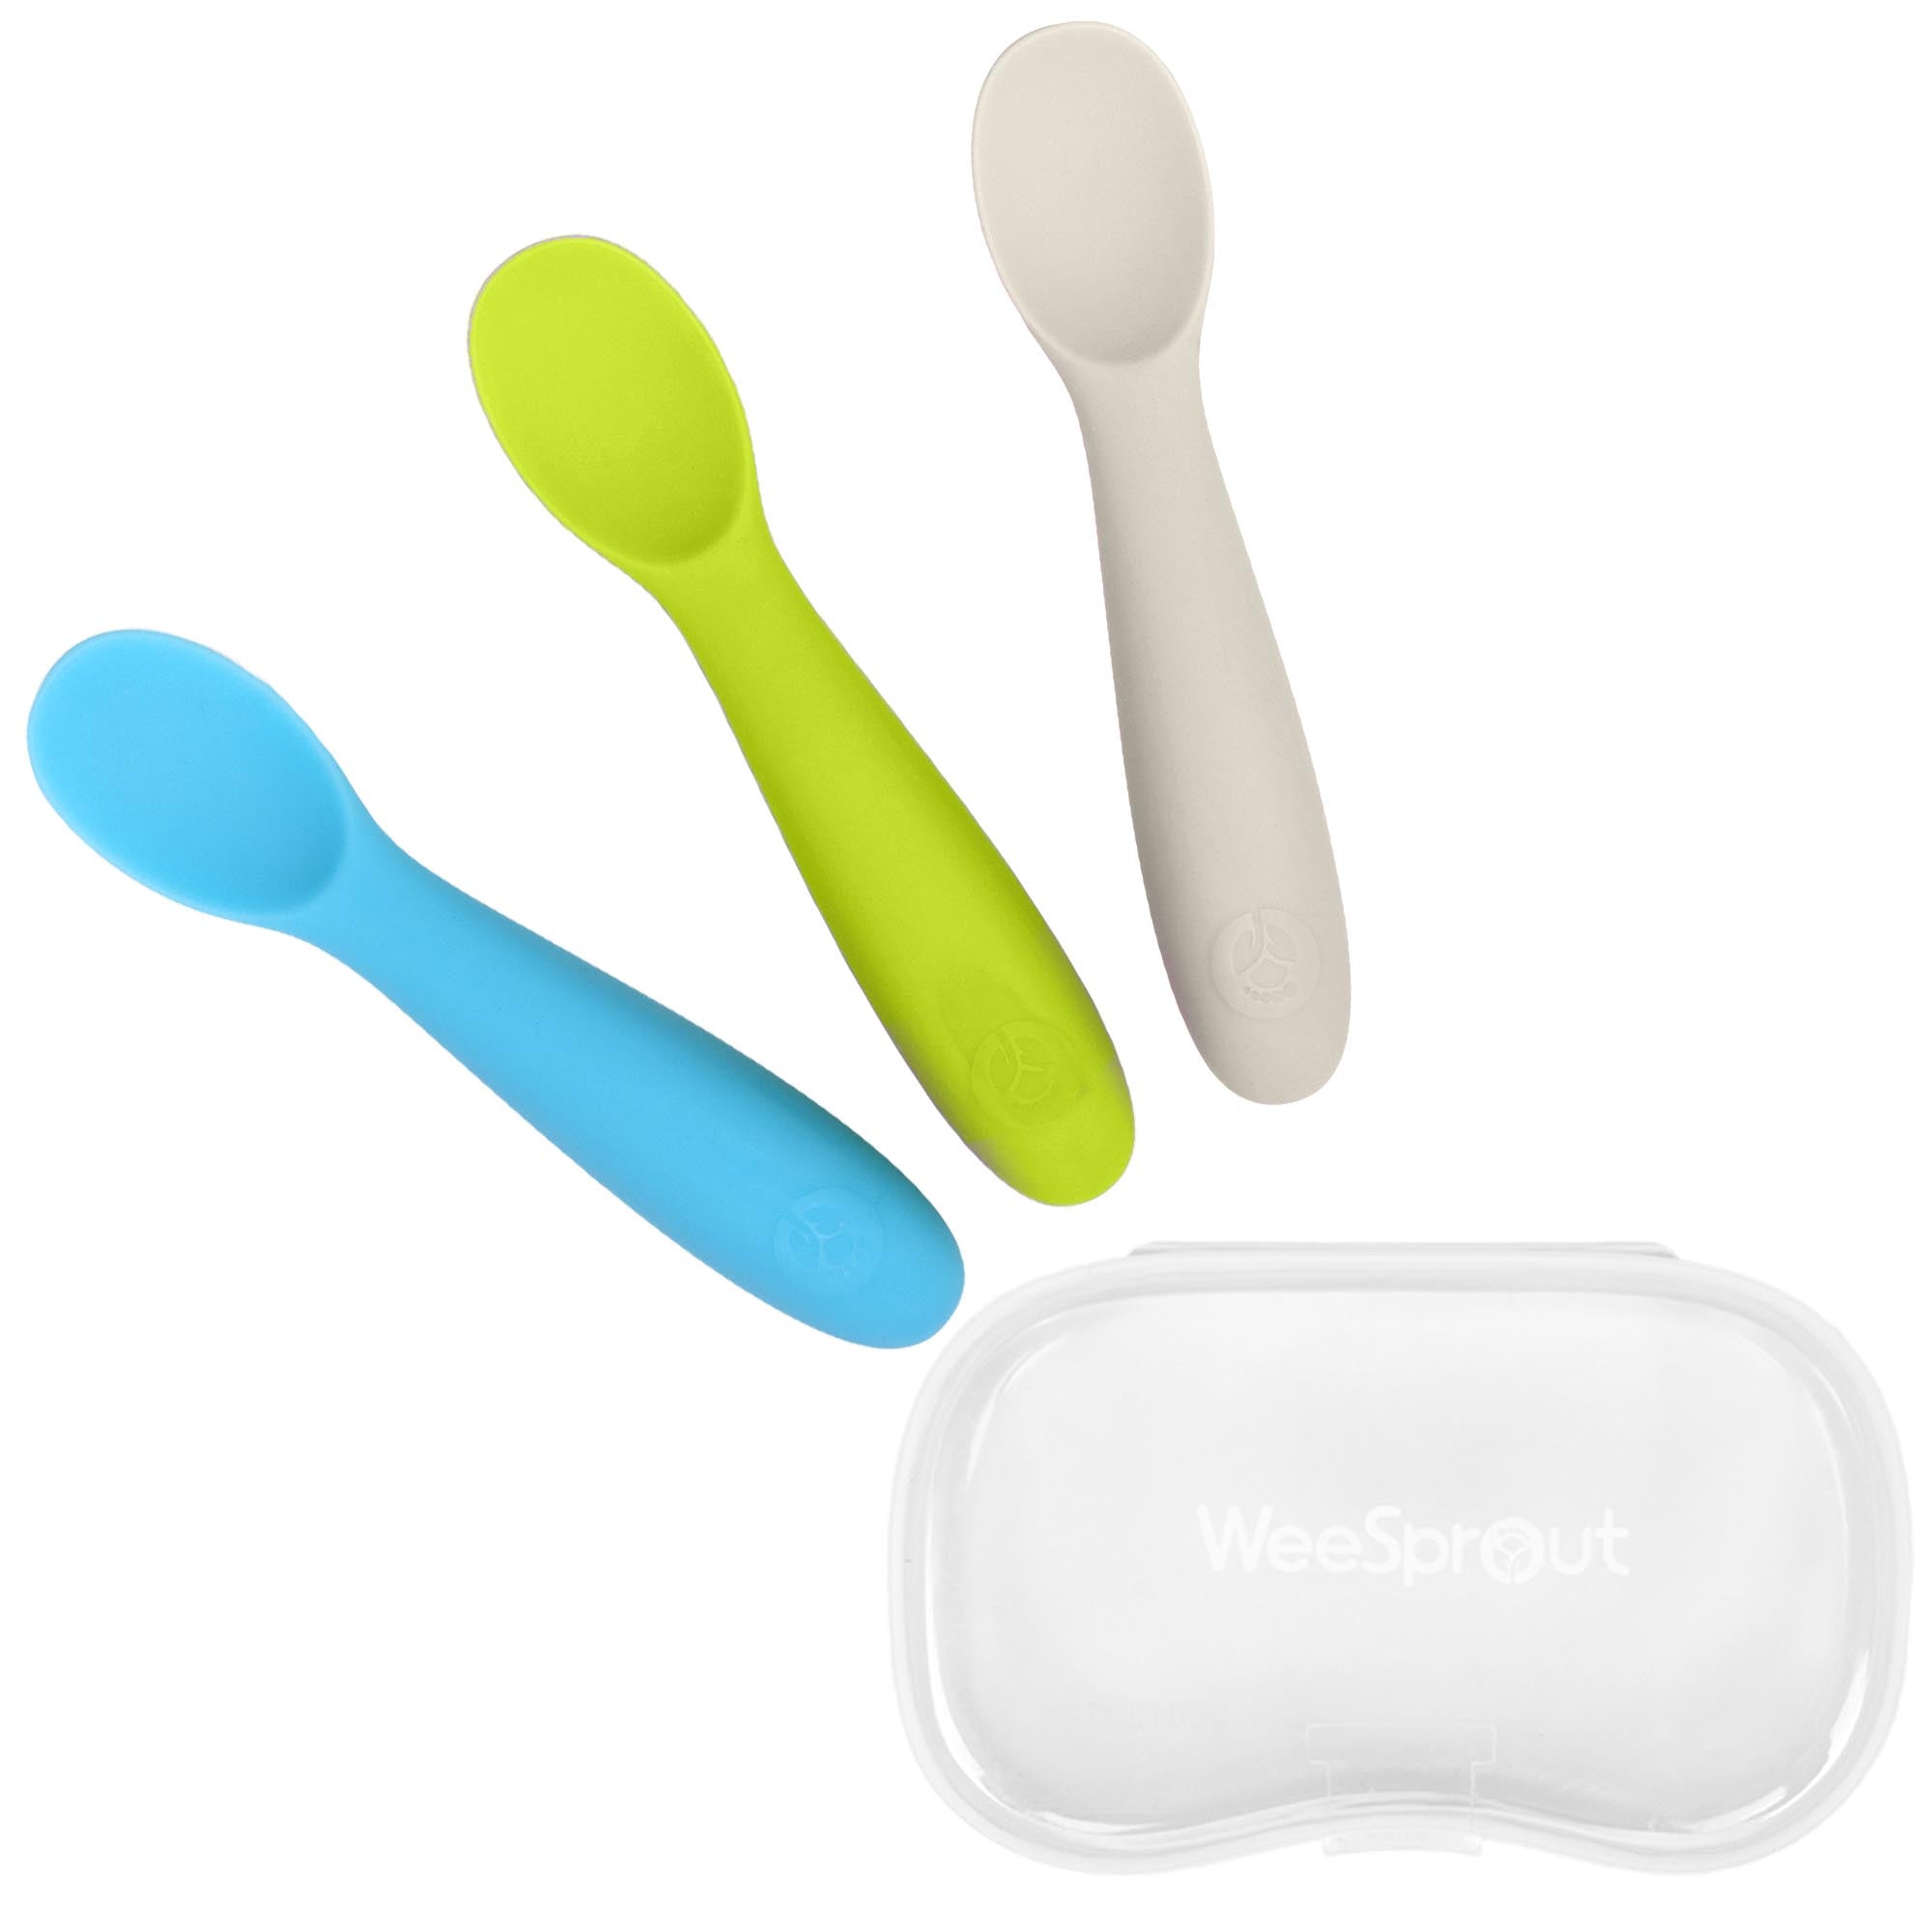 WeeSprout Toddler Utensils, 3 Forks & 3 Spoons, 18/8 Stainless Steel & Food Grade Silicone, purple,pink, Blue